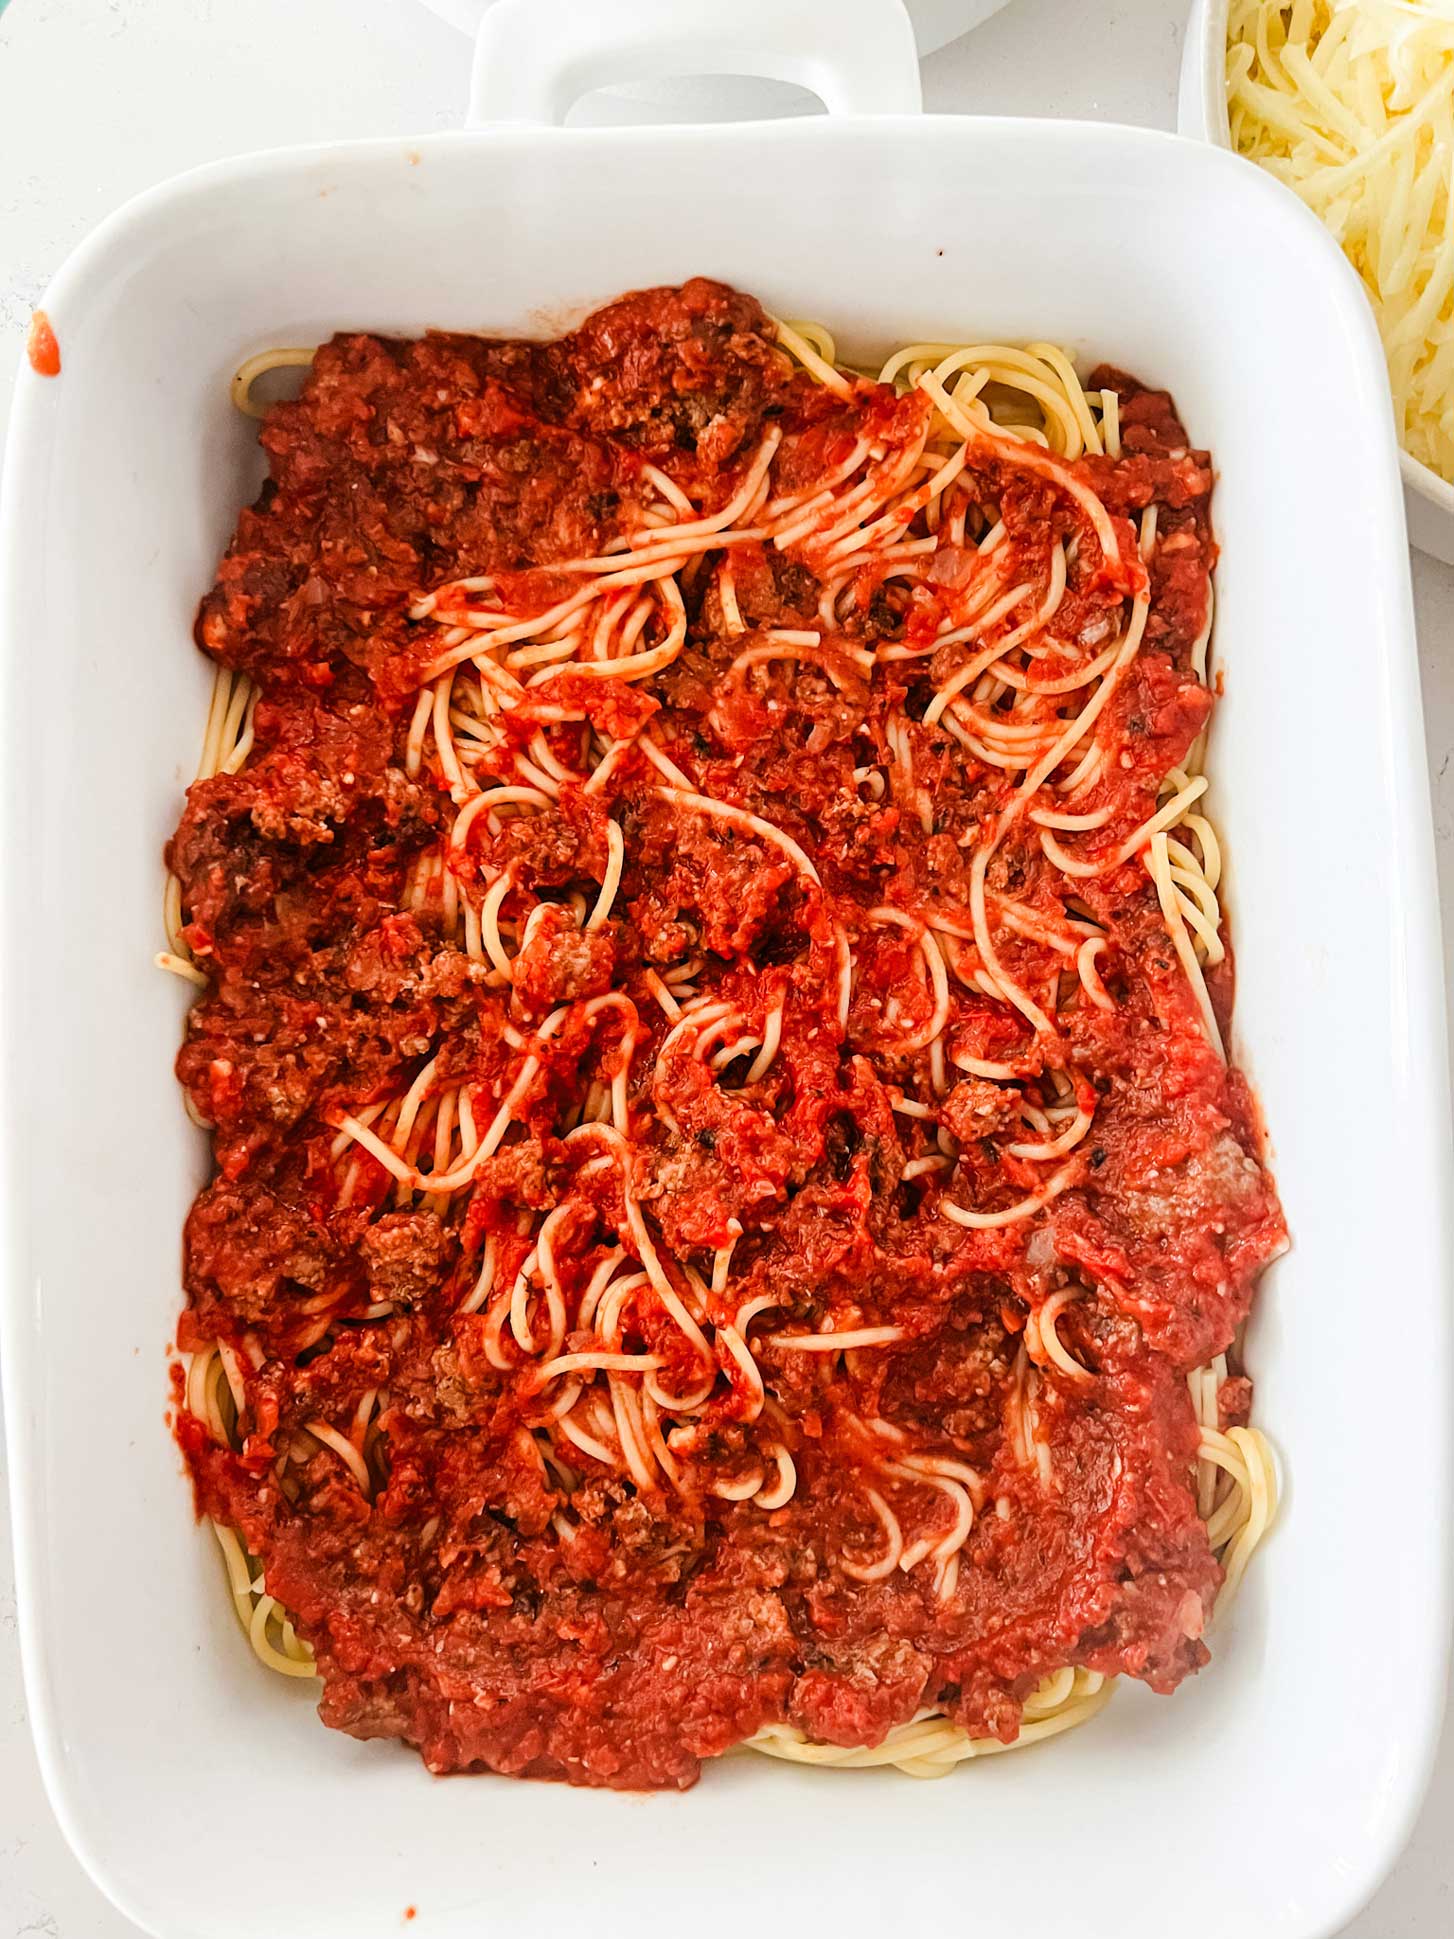 Overhead photo of a casserole dish with spaghetti noodles and meat sauce.